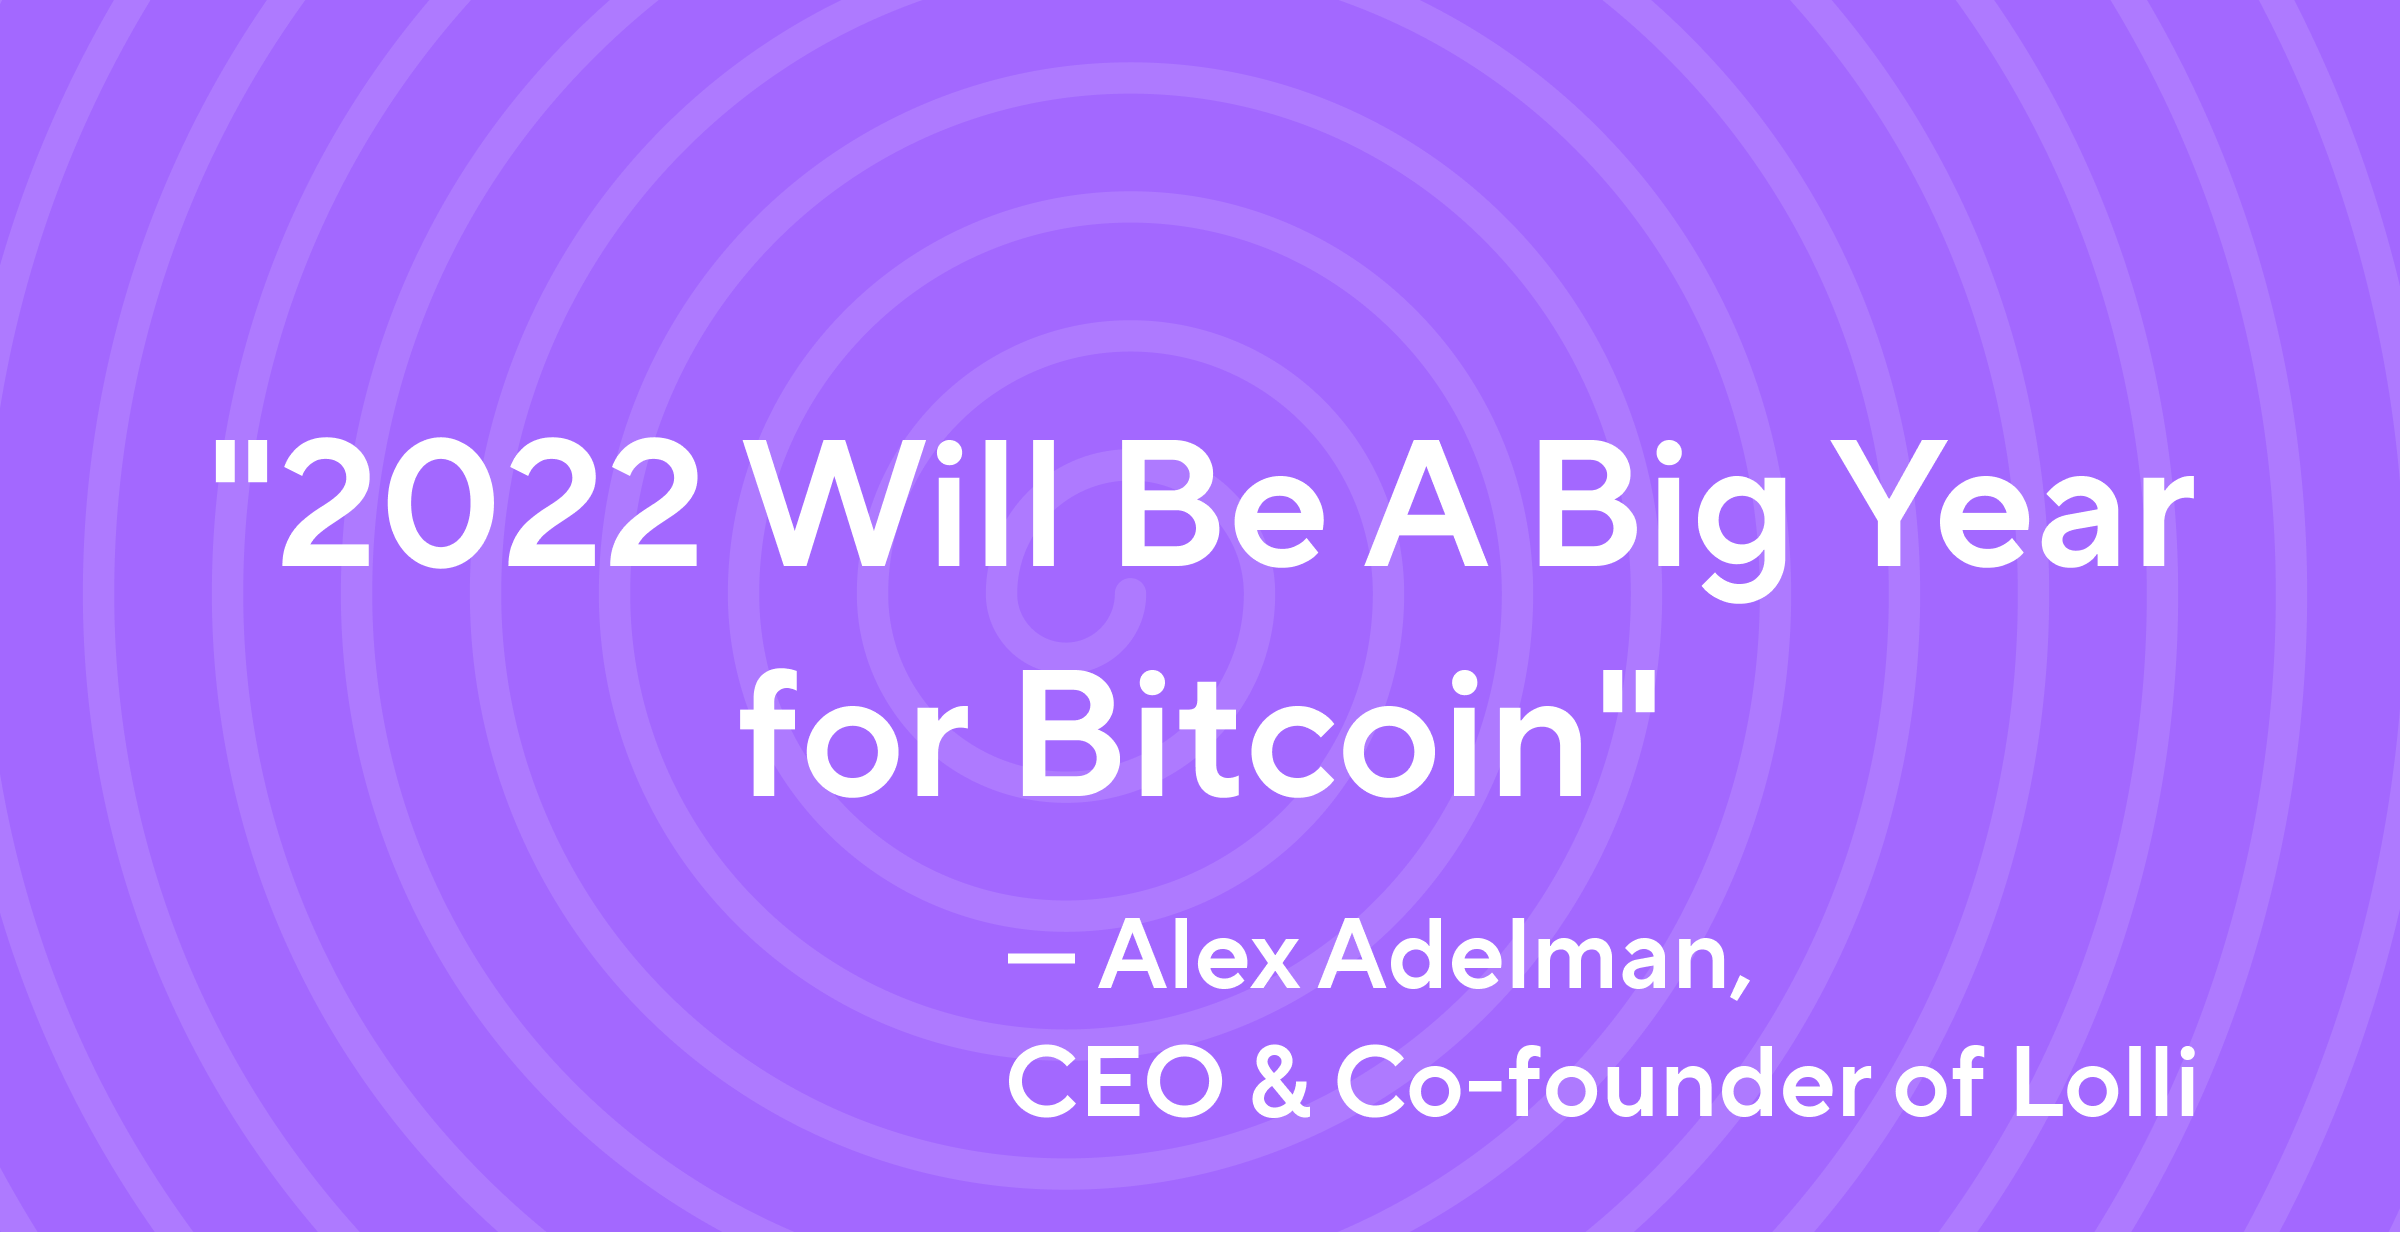 "2022 Will Be A Big Year for Bitcoin" — Lolli CEO